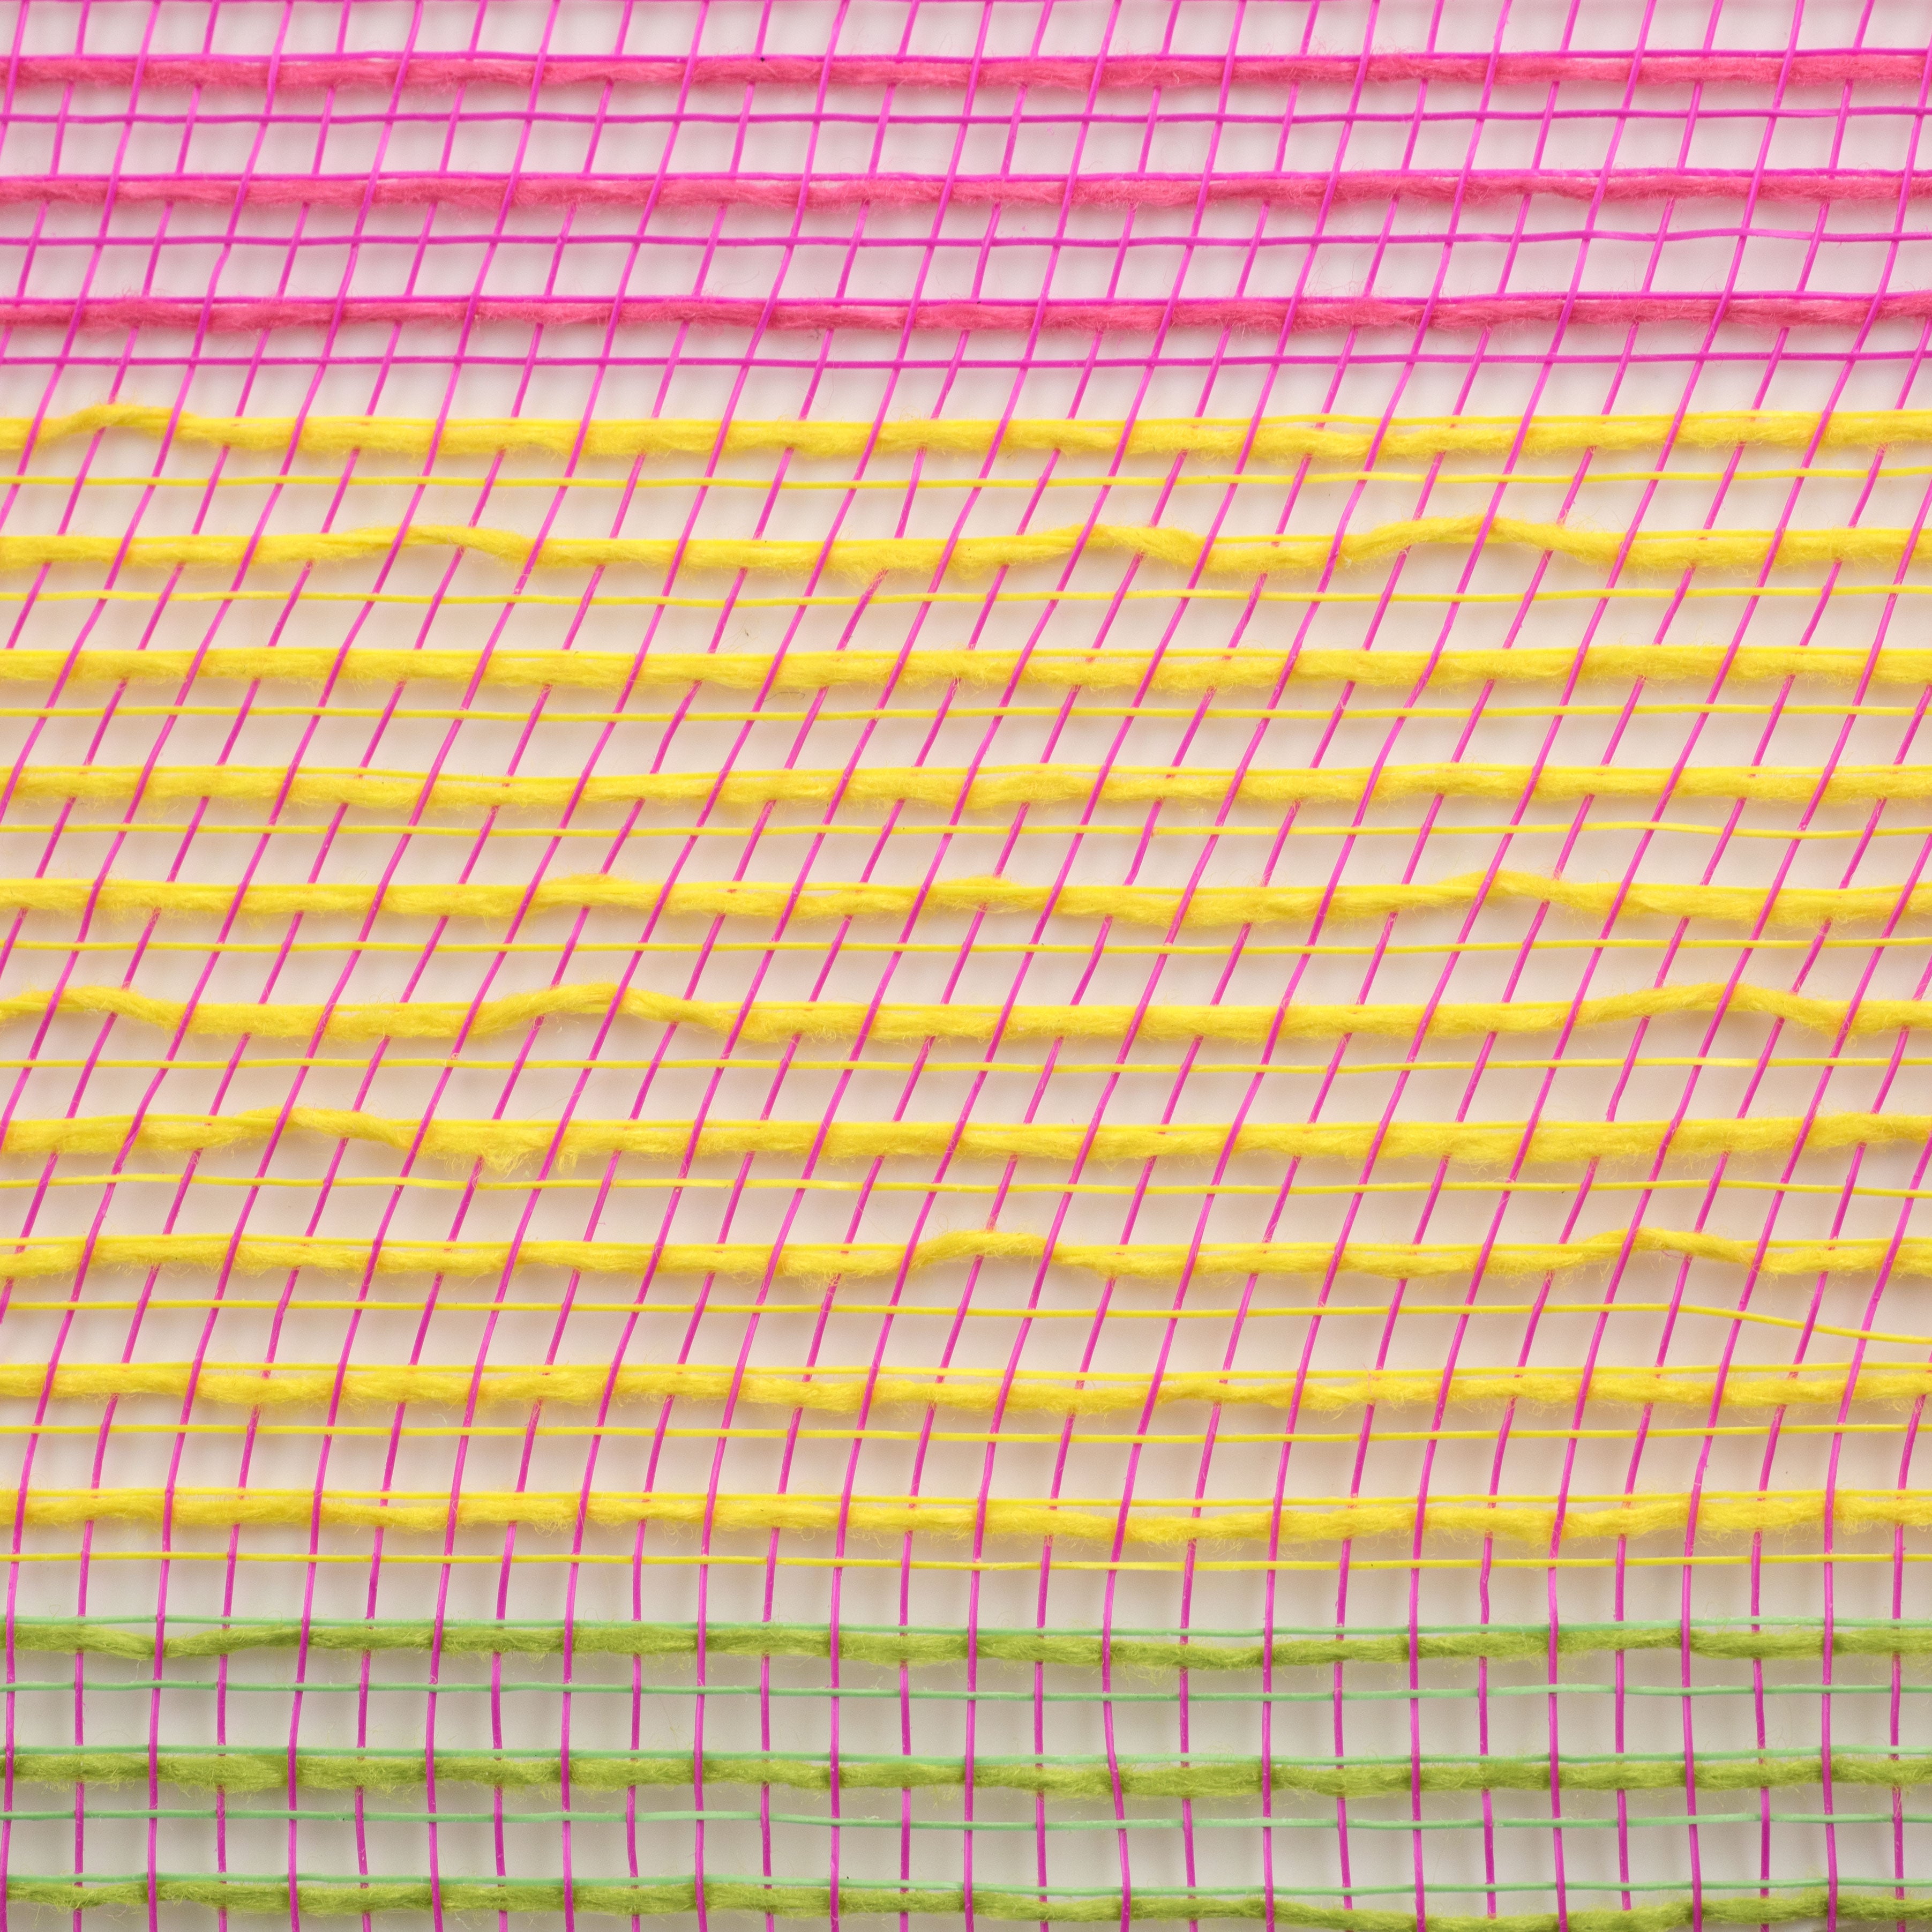 10" Wide Stripe Fabric Mesh: Hot Pink, Green, Yellow, Lavender, Turquoise